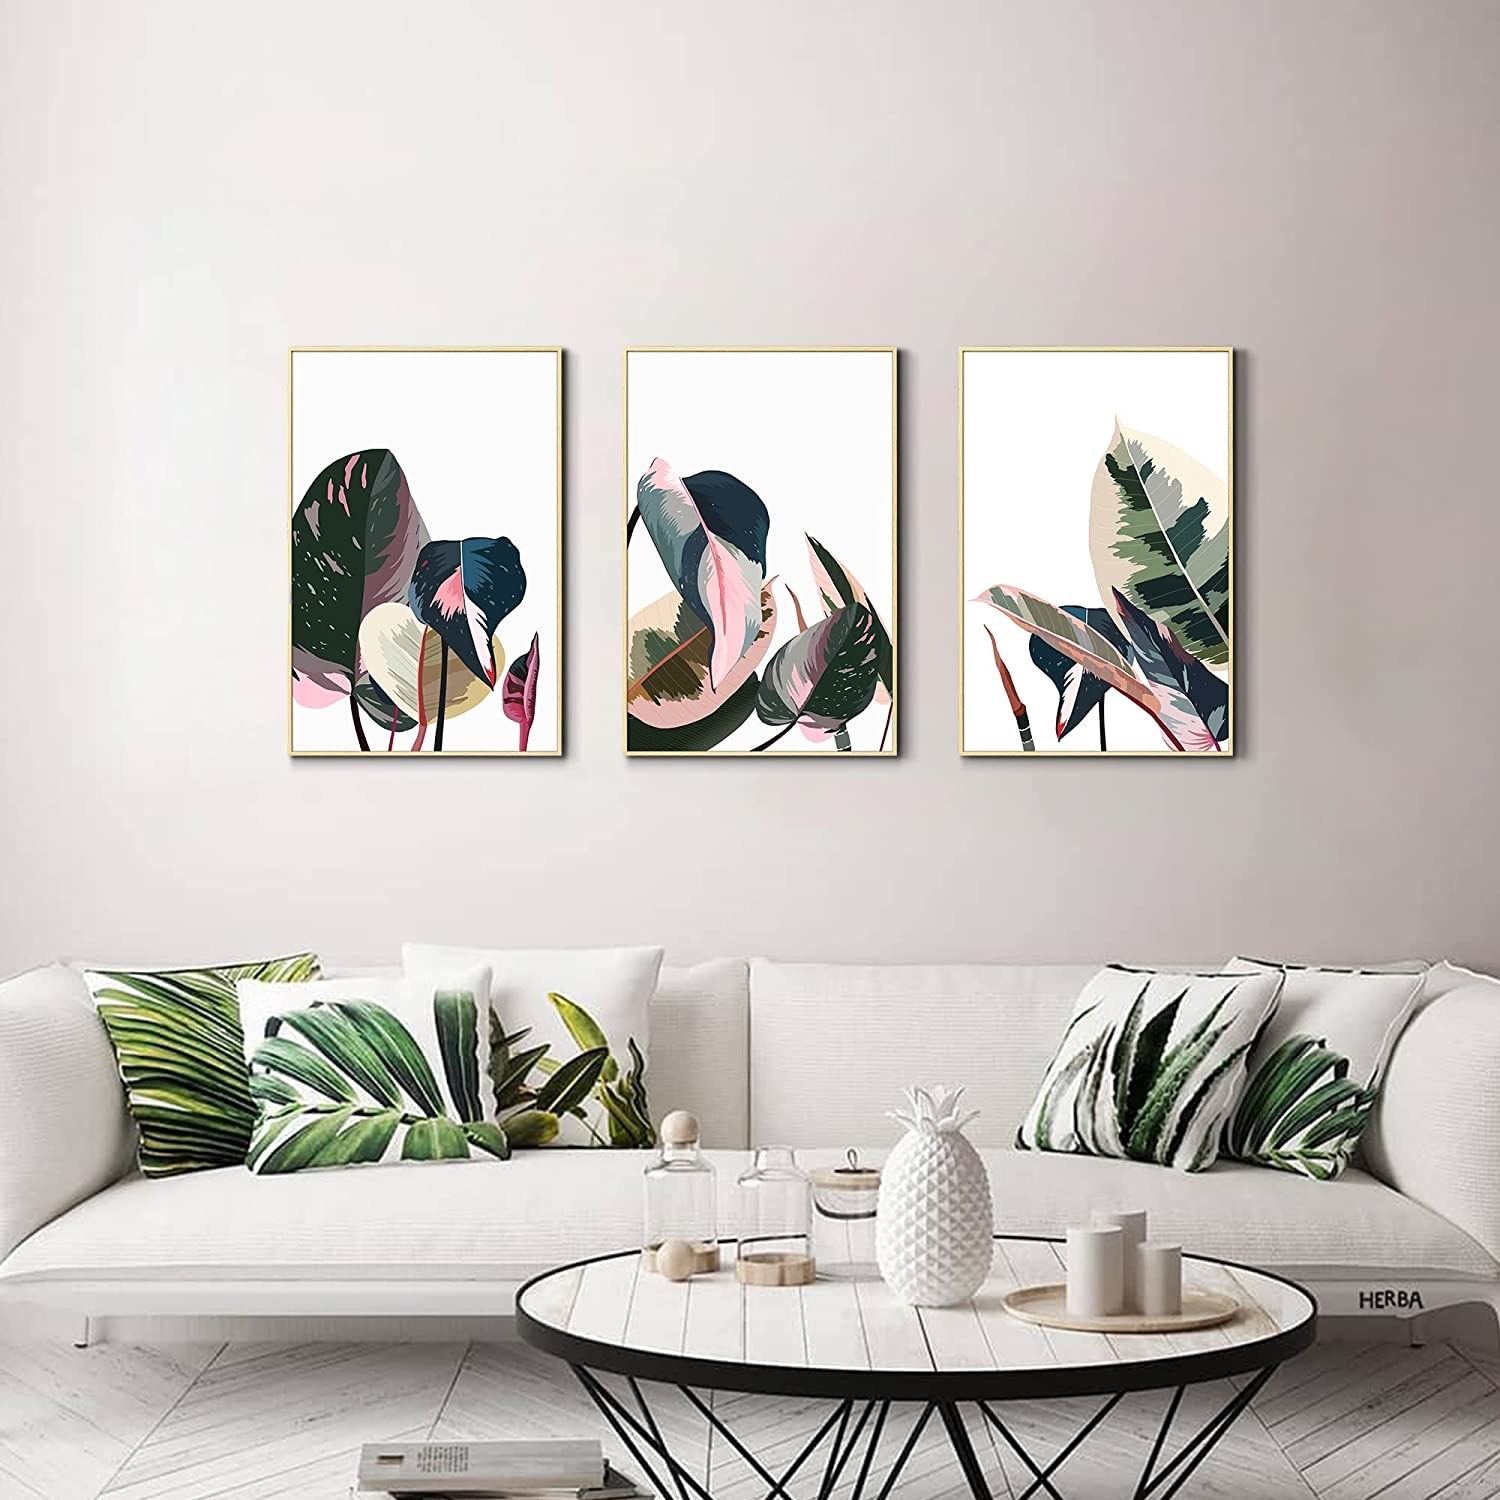 the three paintings hanging over a couch